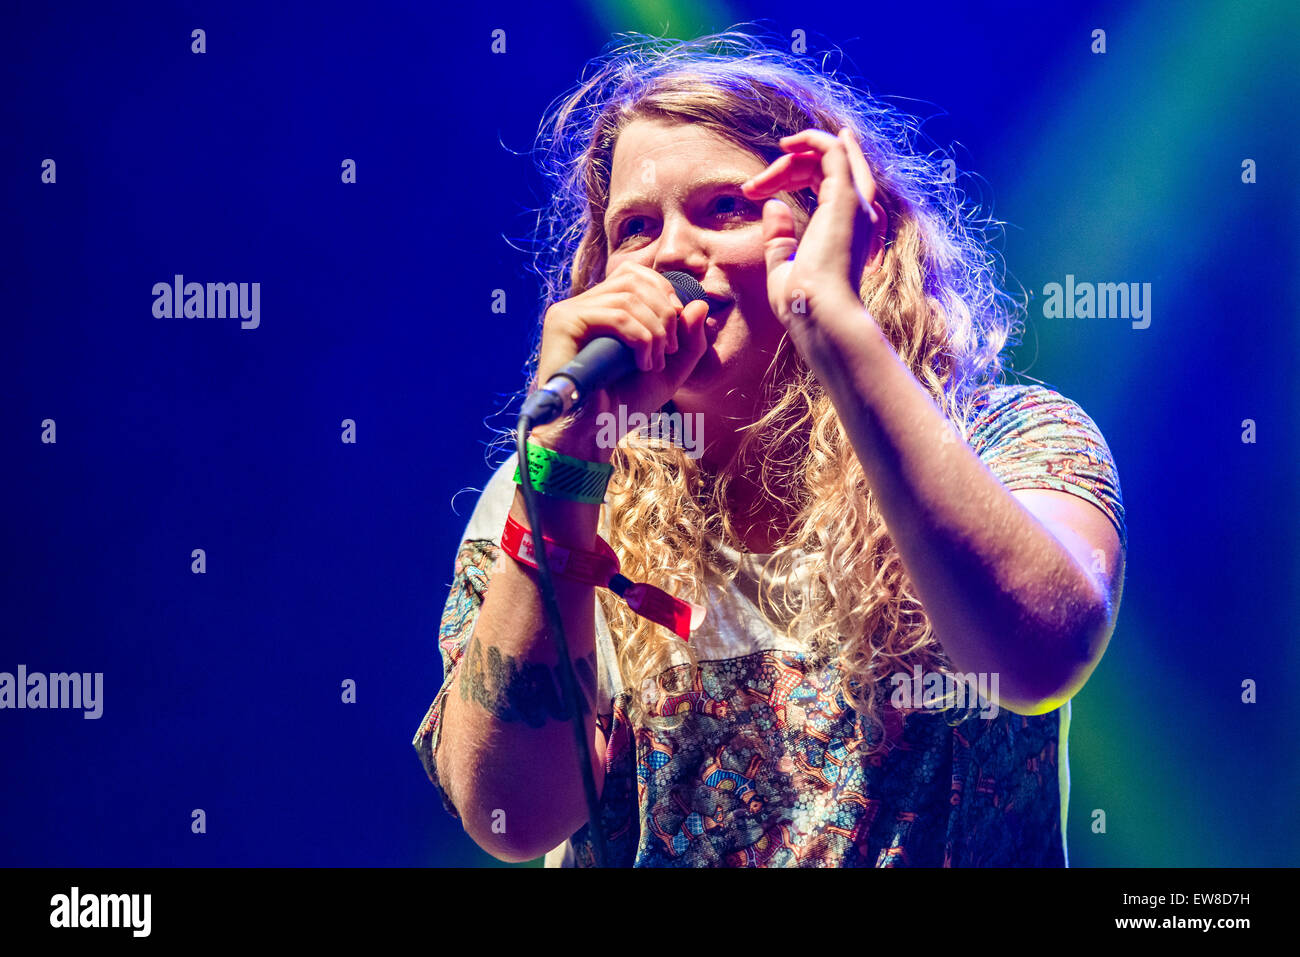 Barcelona, Catalonia, Spain. 19th June, 2015. KATE TEMPEST, Britain's leading young poet, playwright and rapper, is live on stage with her spoken-word performance at the 22nd Sonar Barcelona Credit:  Matthias Oesterle/ZUMA Wire/ZUMAPRESS.com/Alamy Live News Stock Photo